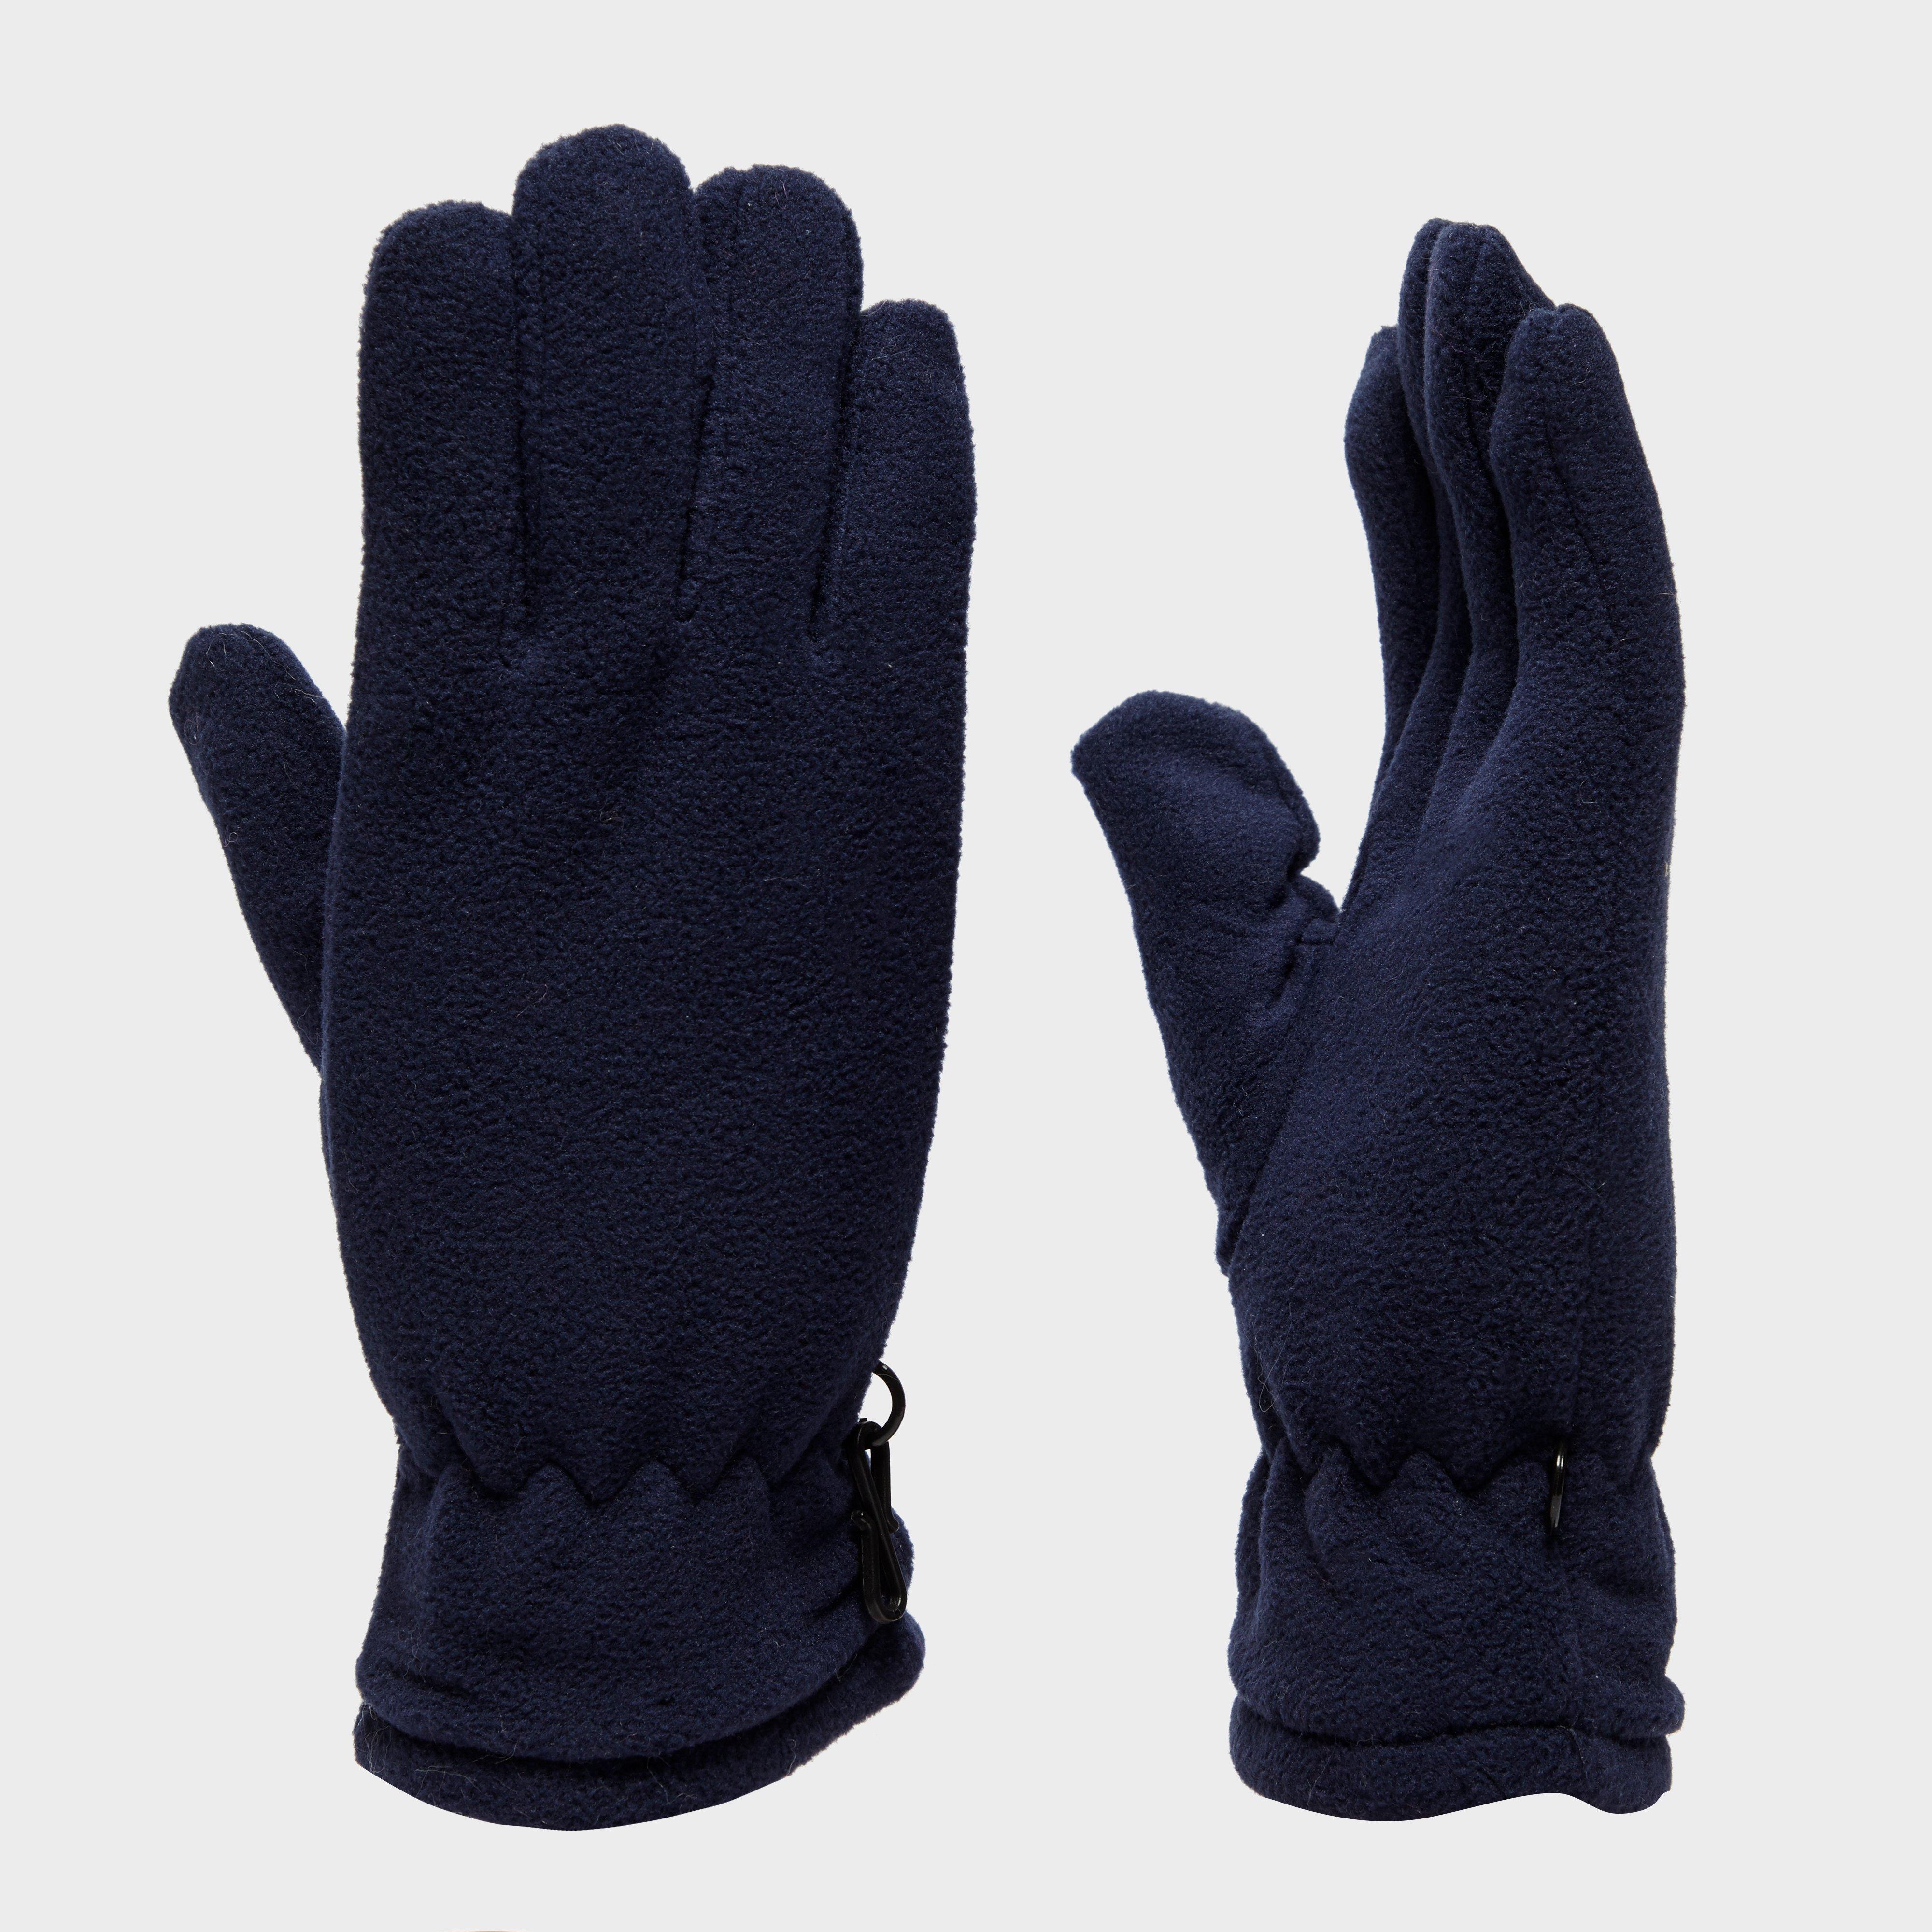 Peter Storm Thinsulate Double Fleece Gloves - Navy/nvy  Navy/nvy